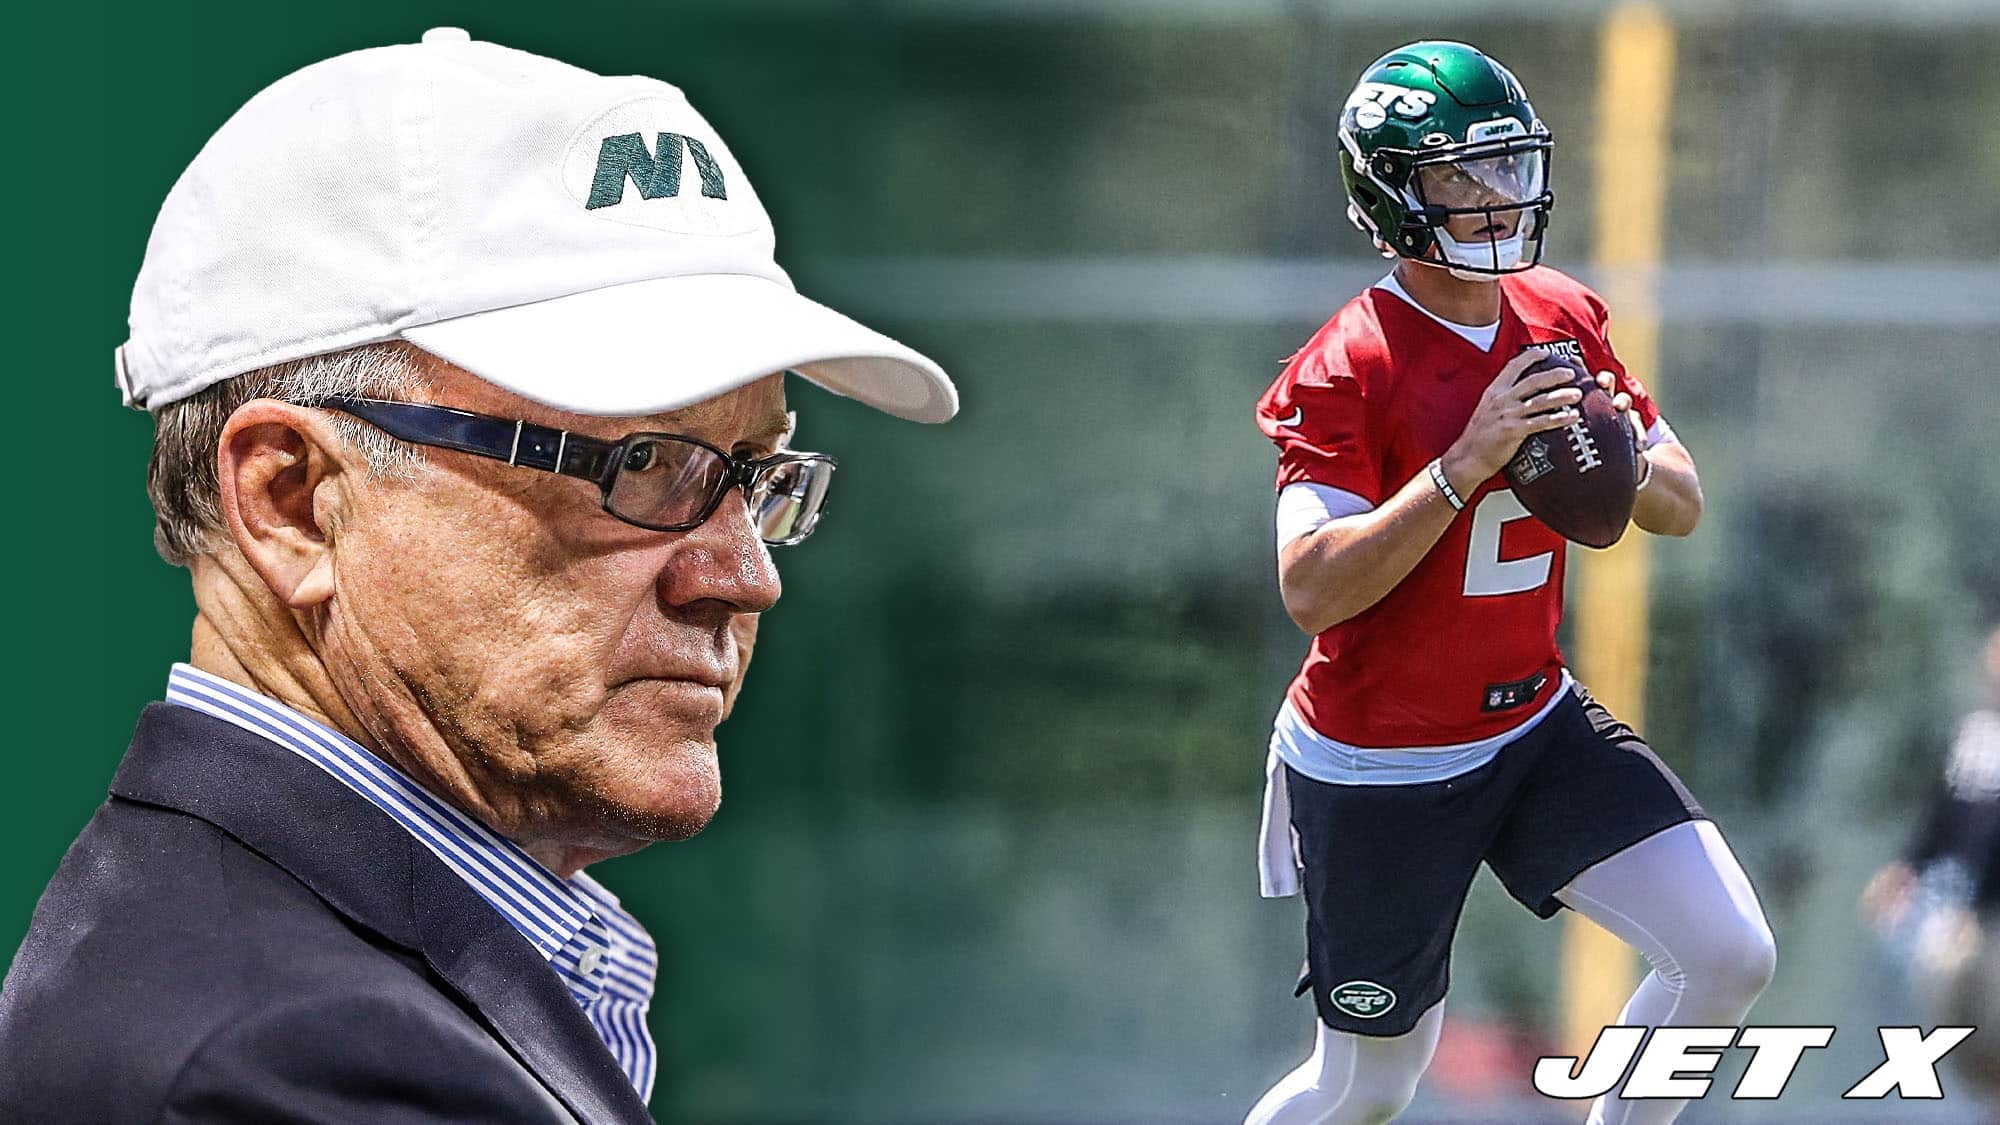 Woody Johnson shared a video of young NY Jets stars Zach Wilson and Elijah Moore making a great throw and catch..